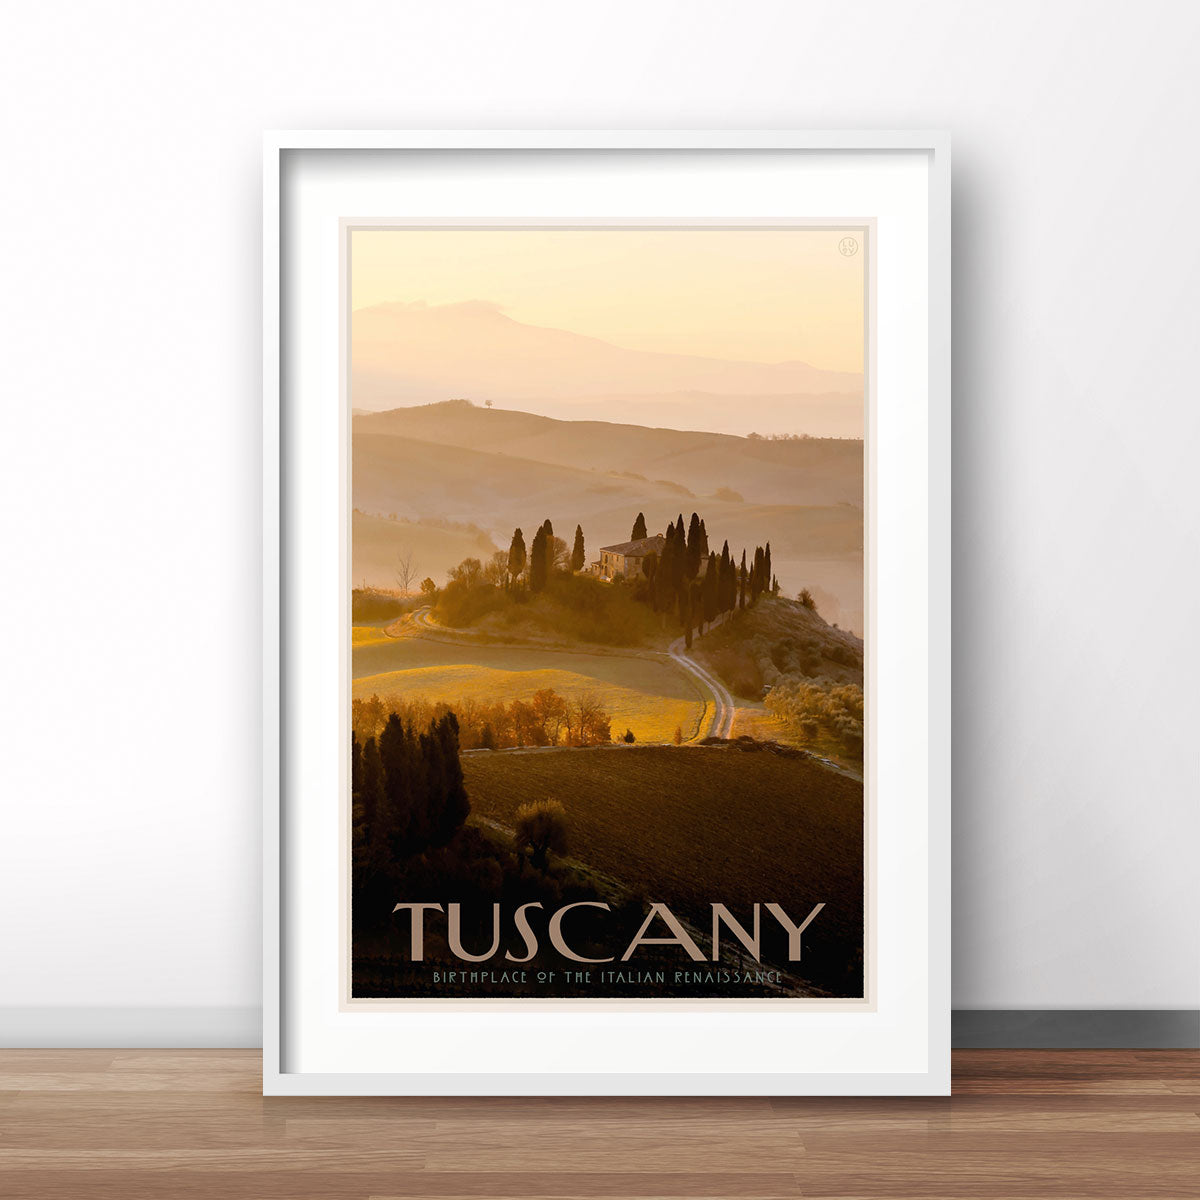 Tuscany vintage travel poster designed by Placesweluv